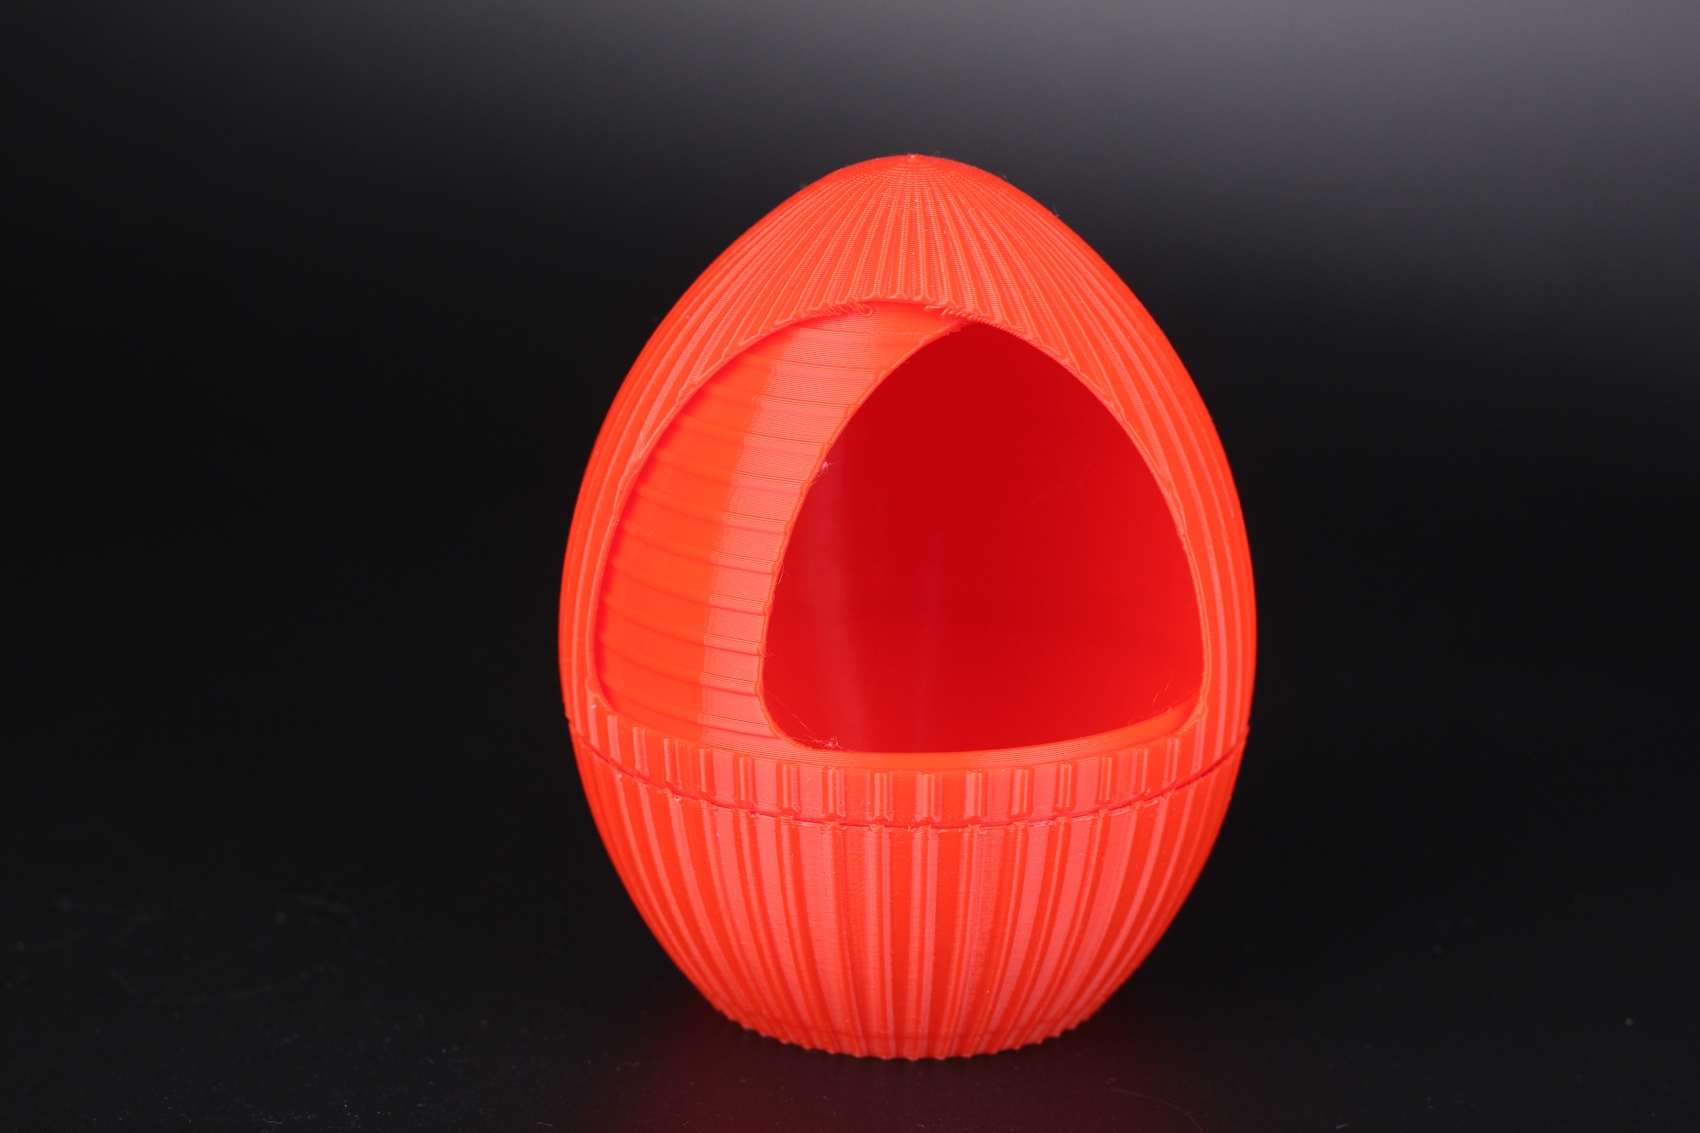 Magic Planetary Egg Container Ender 3 S1 Review3 | Creality Ender 3 S1 Pro Review: The Ultimate Ender 3